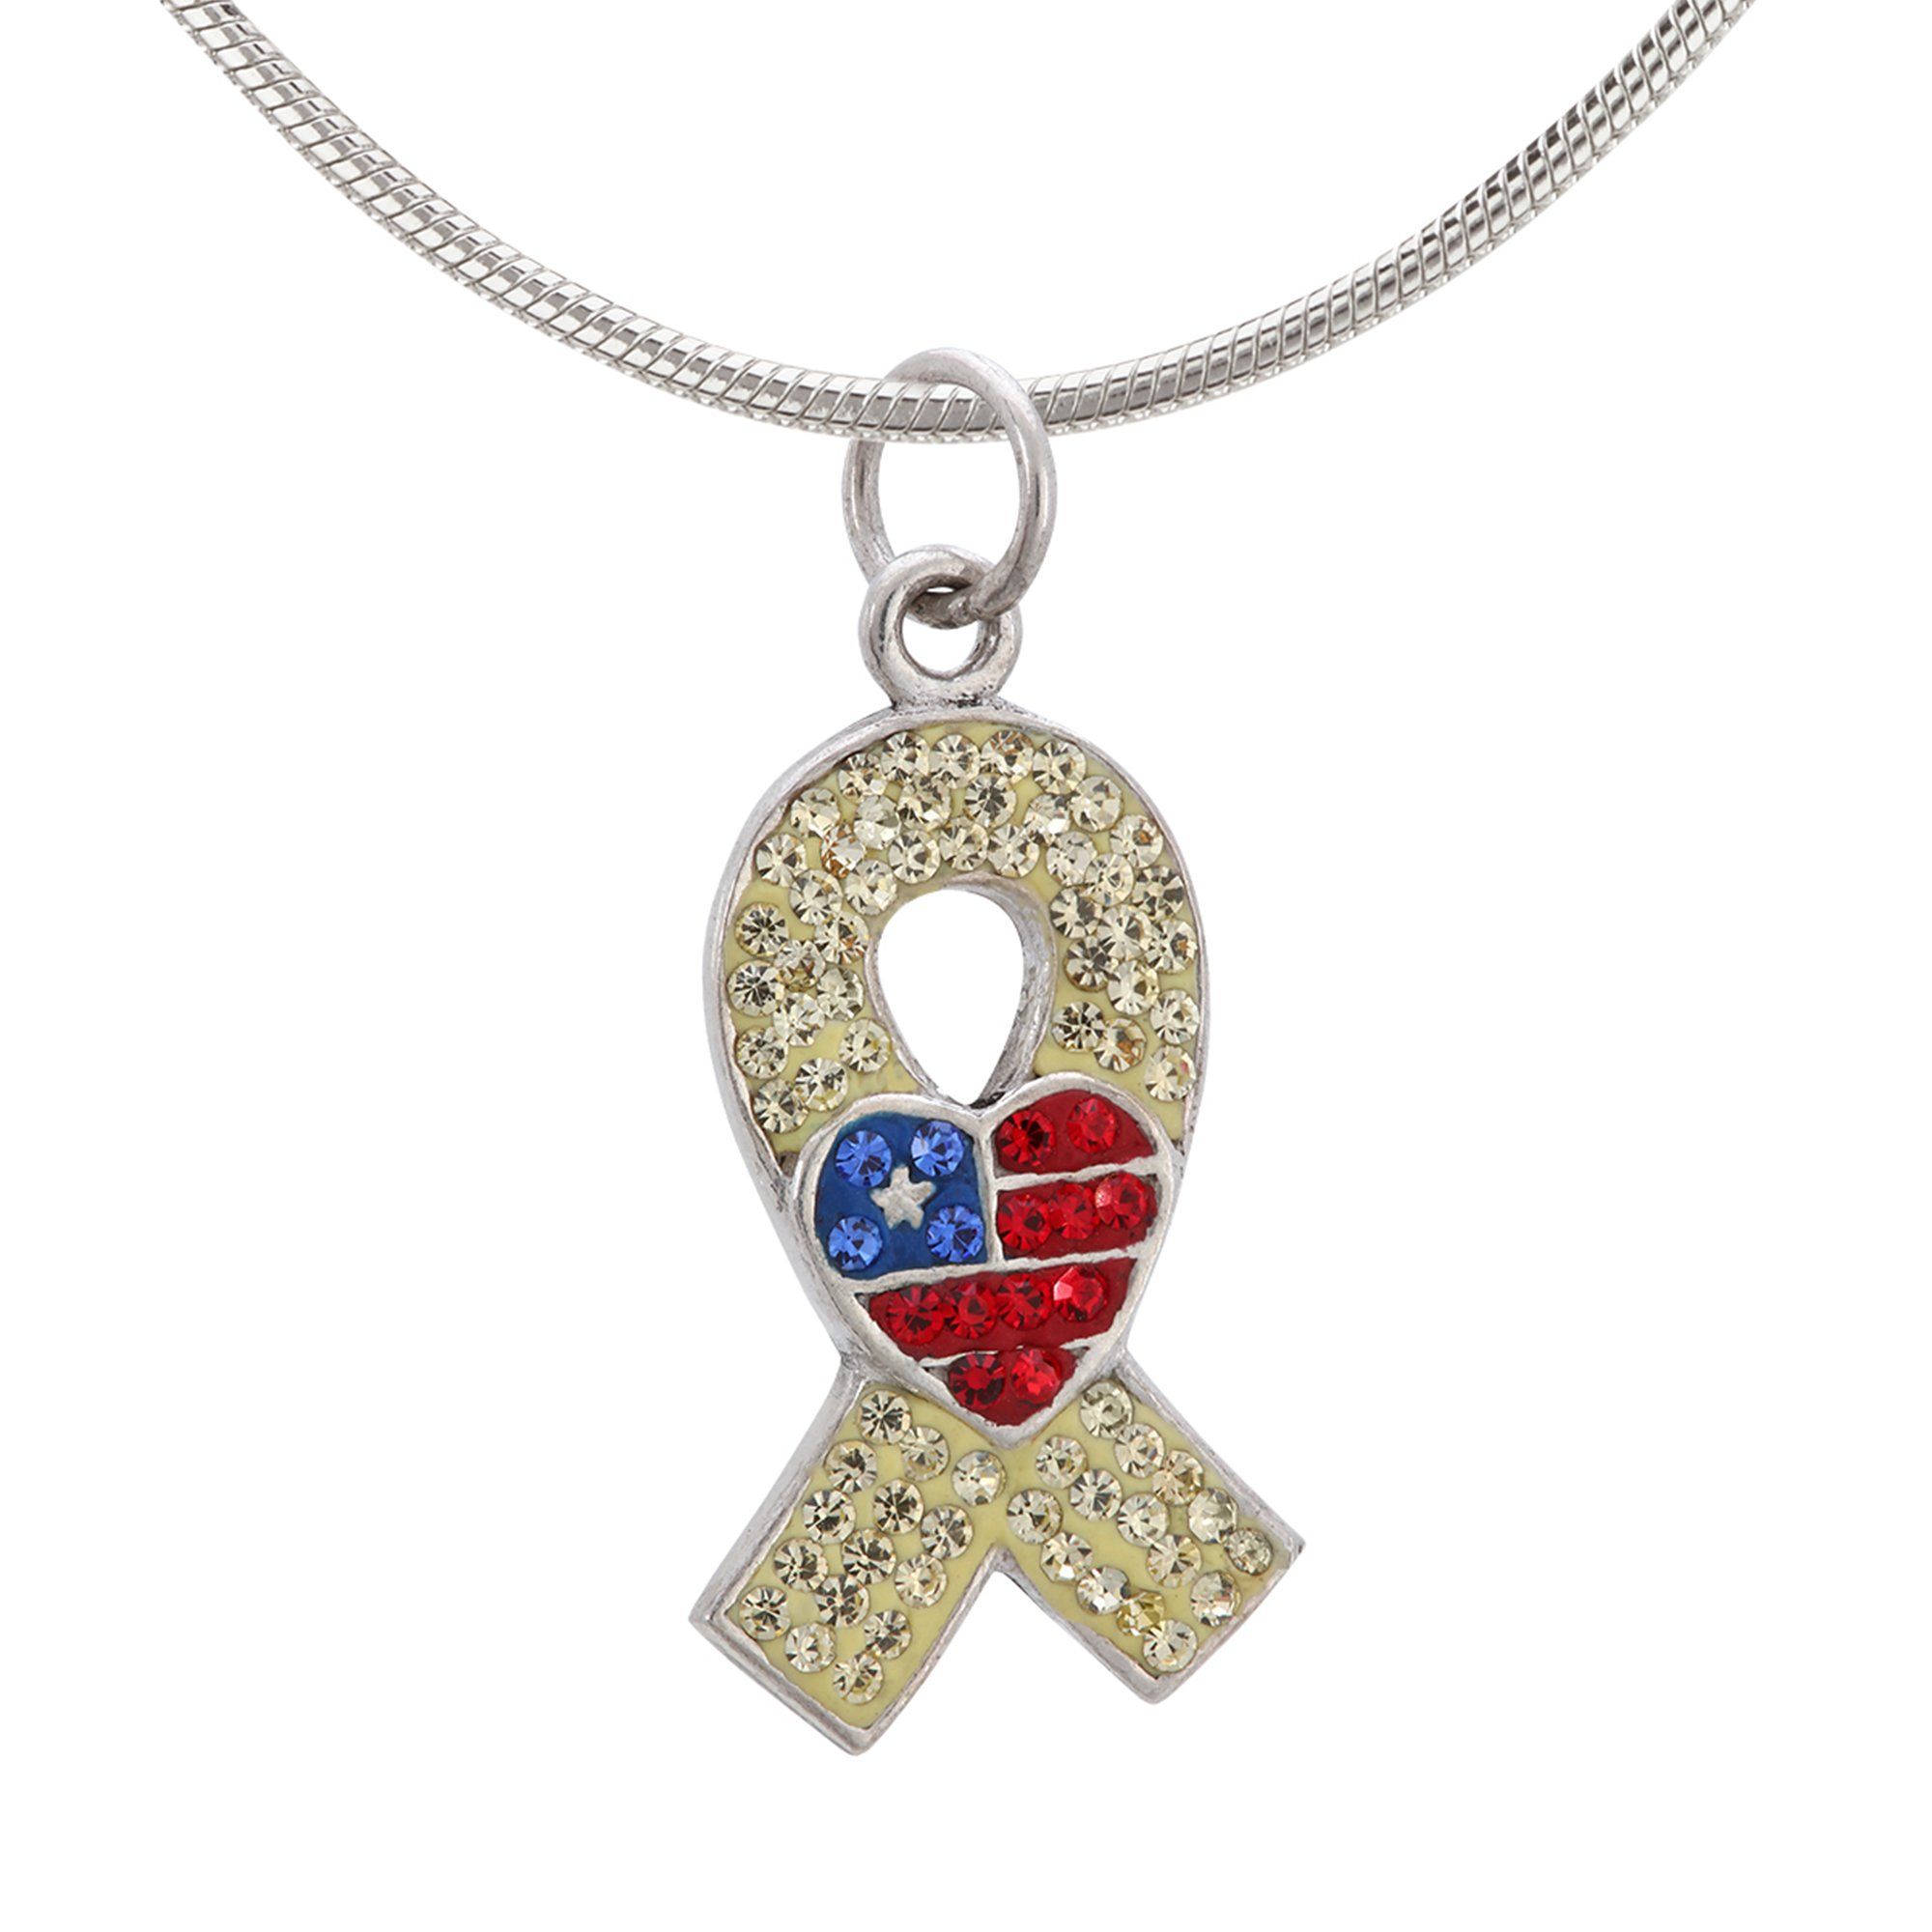 American Heart Yellow Ribbon Crystal & Sterling Necklace - With Sterling Cable Chain